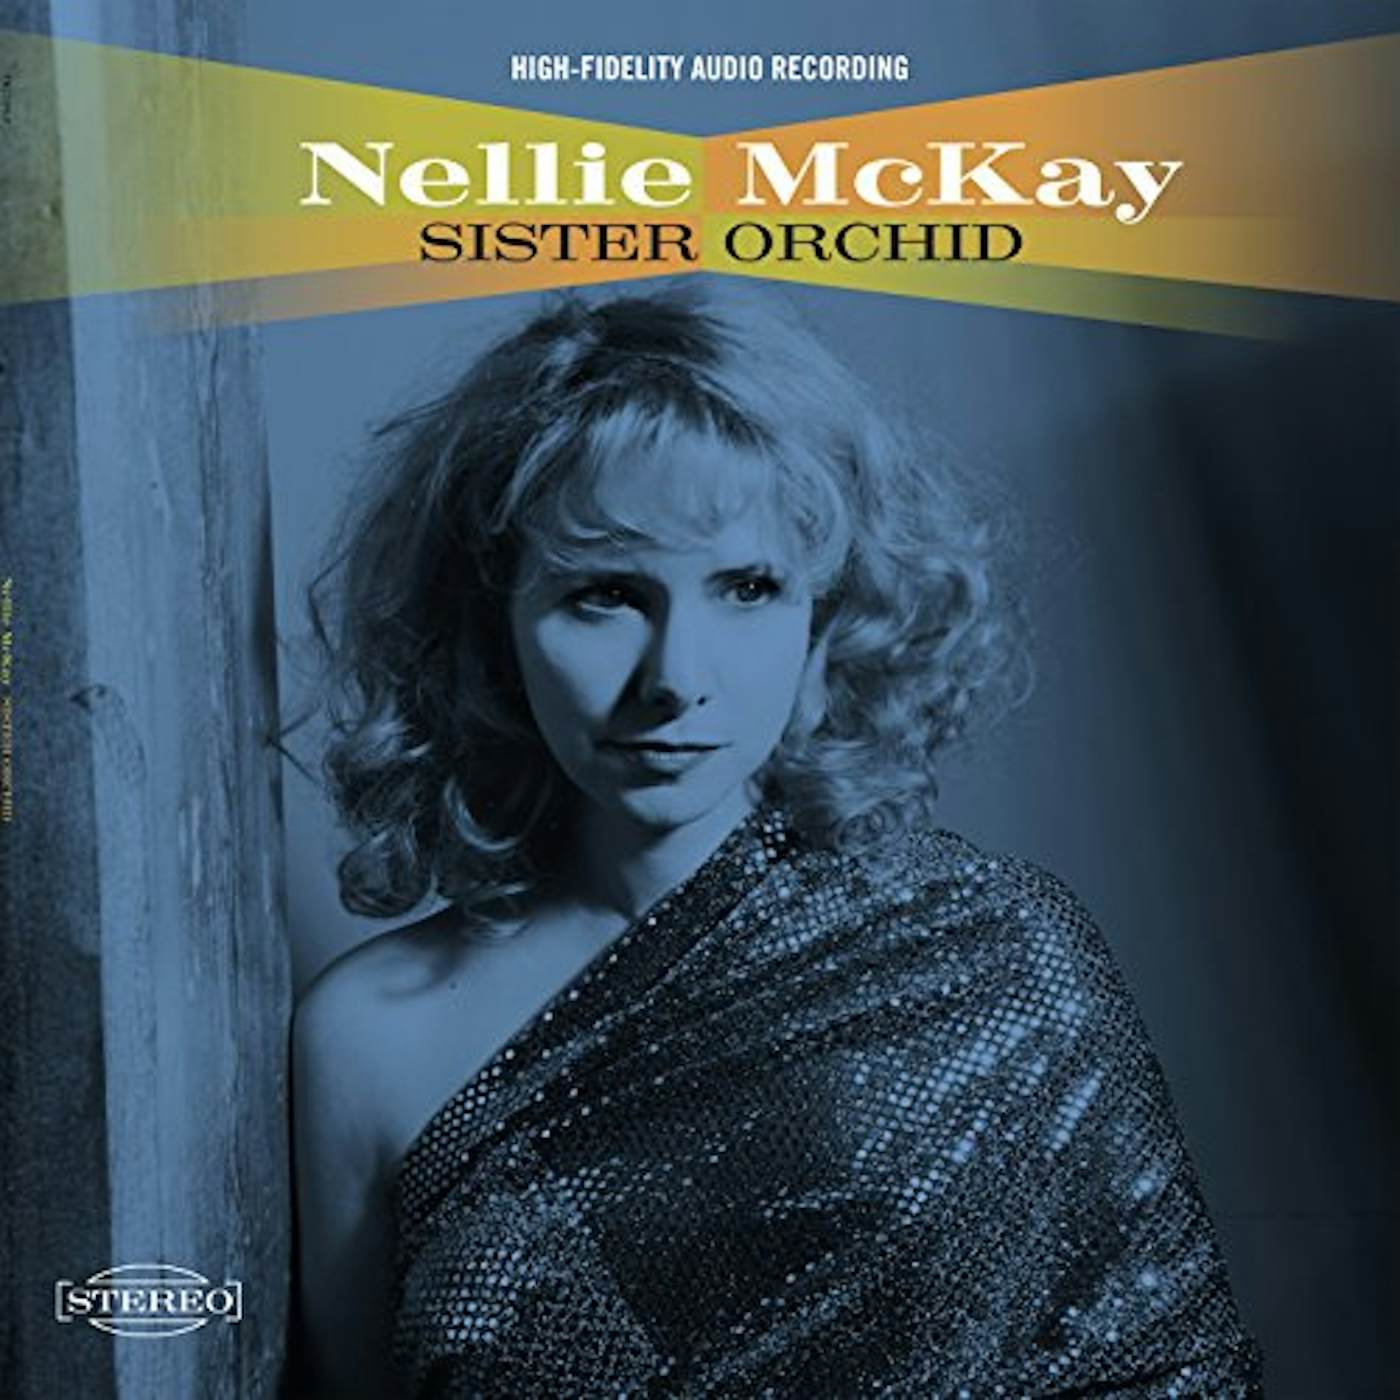 Nellie McKay Sister Orchid Vinyl Record